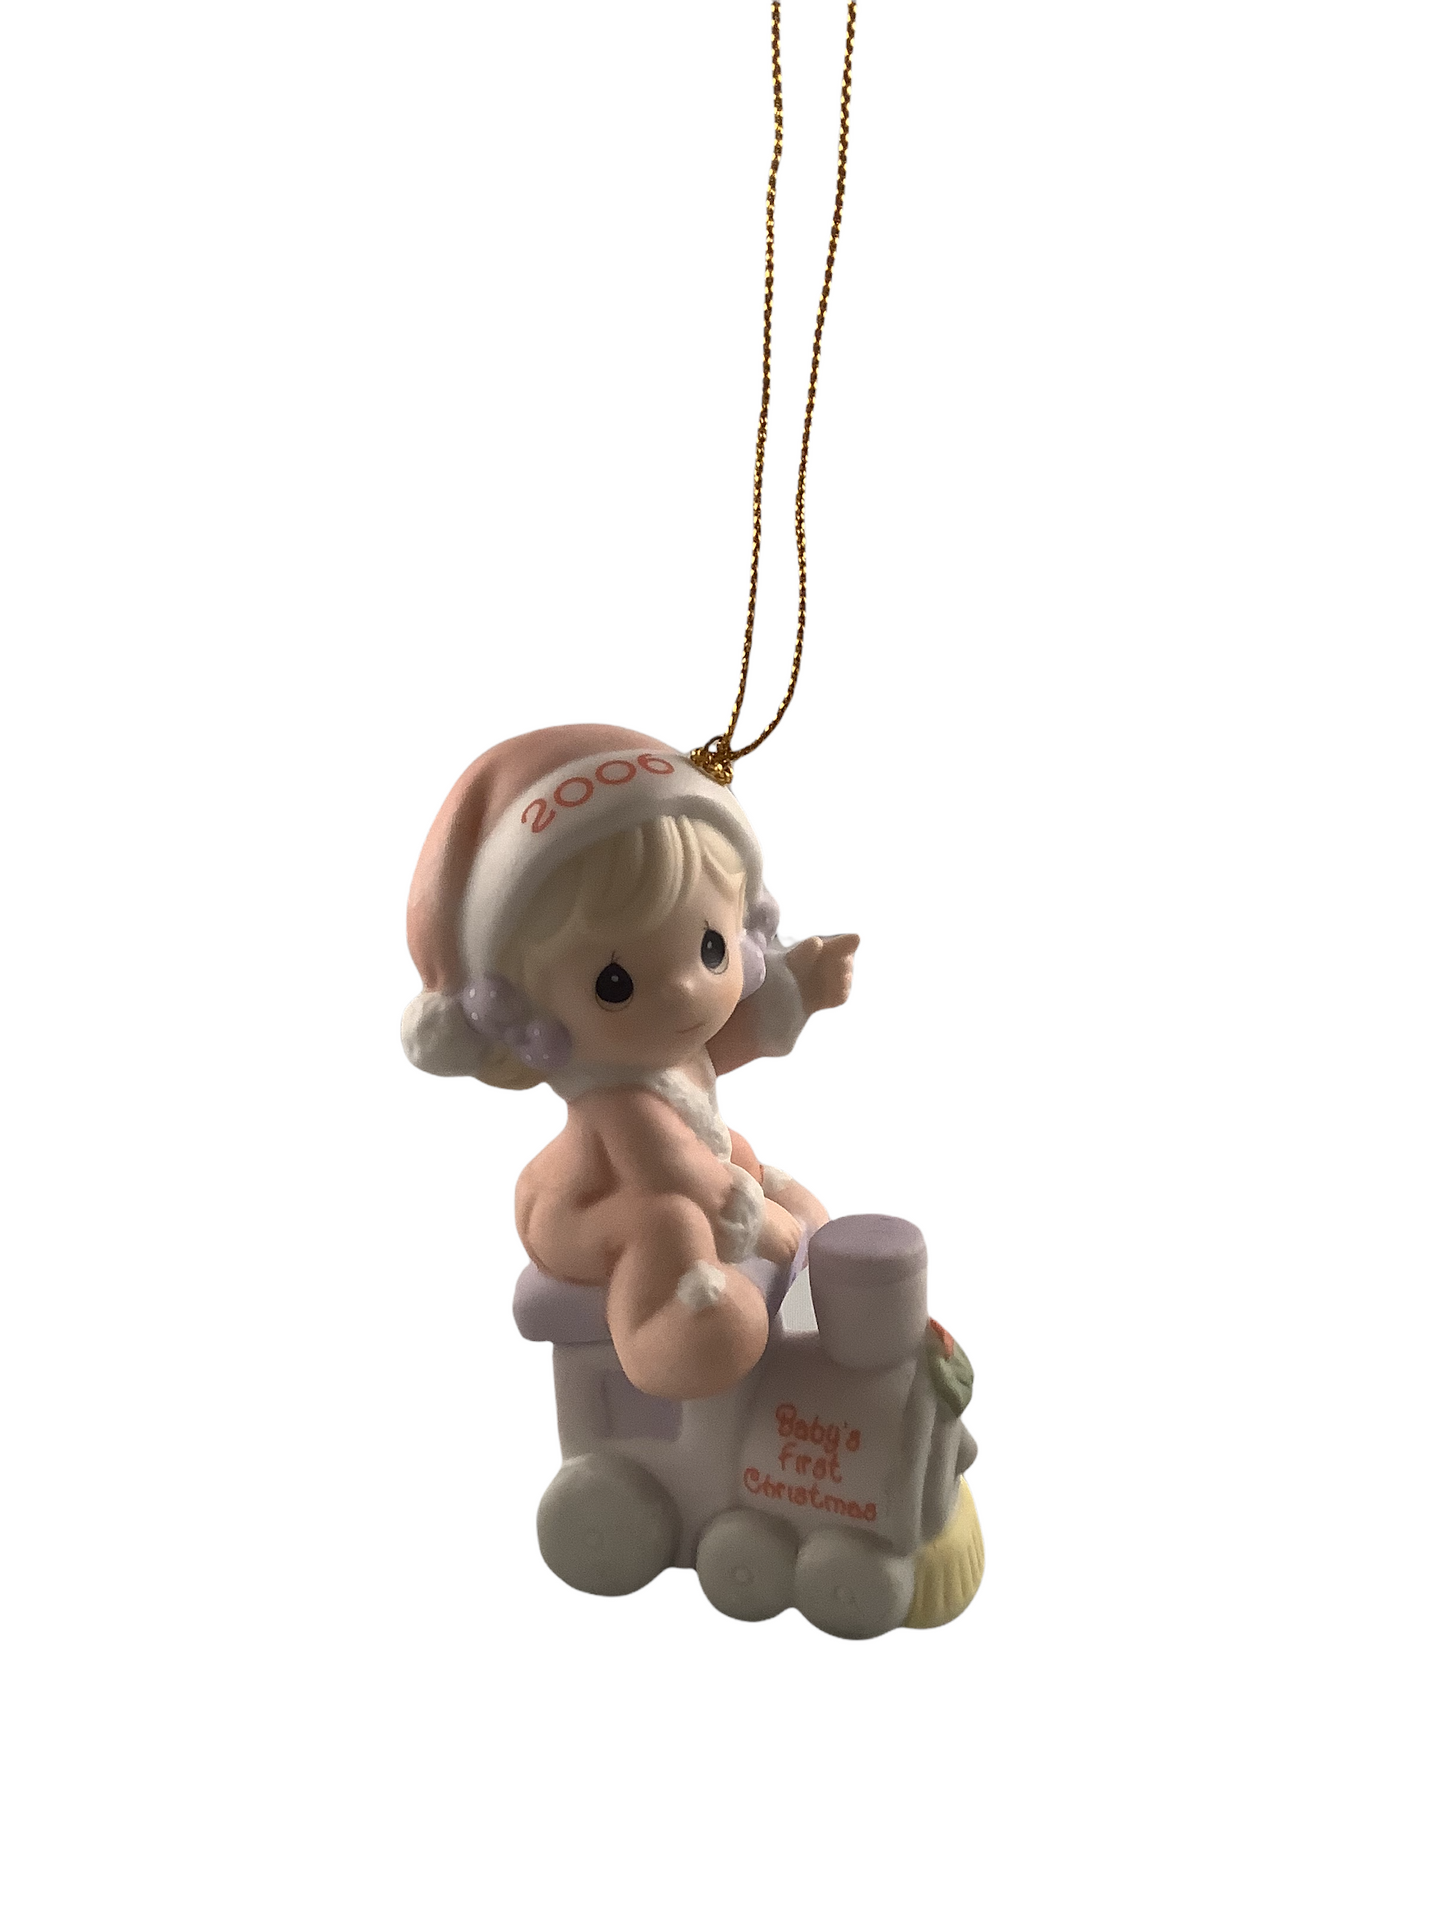 Baby's First Christmas 2006 (Girl) - Precious Moment Ornament